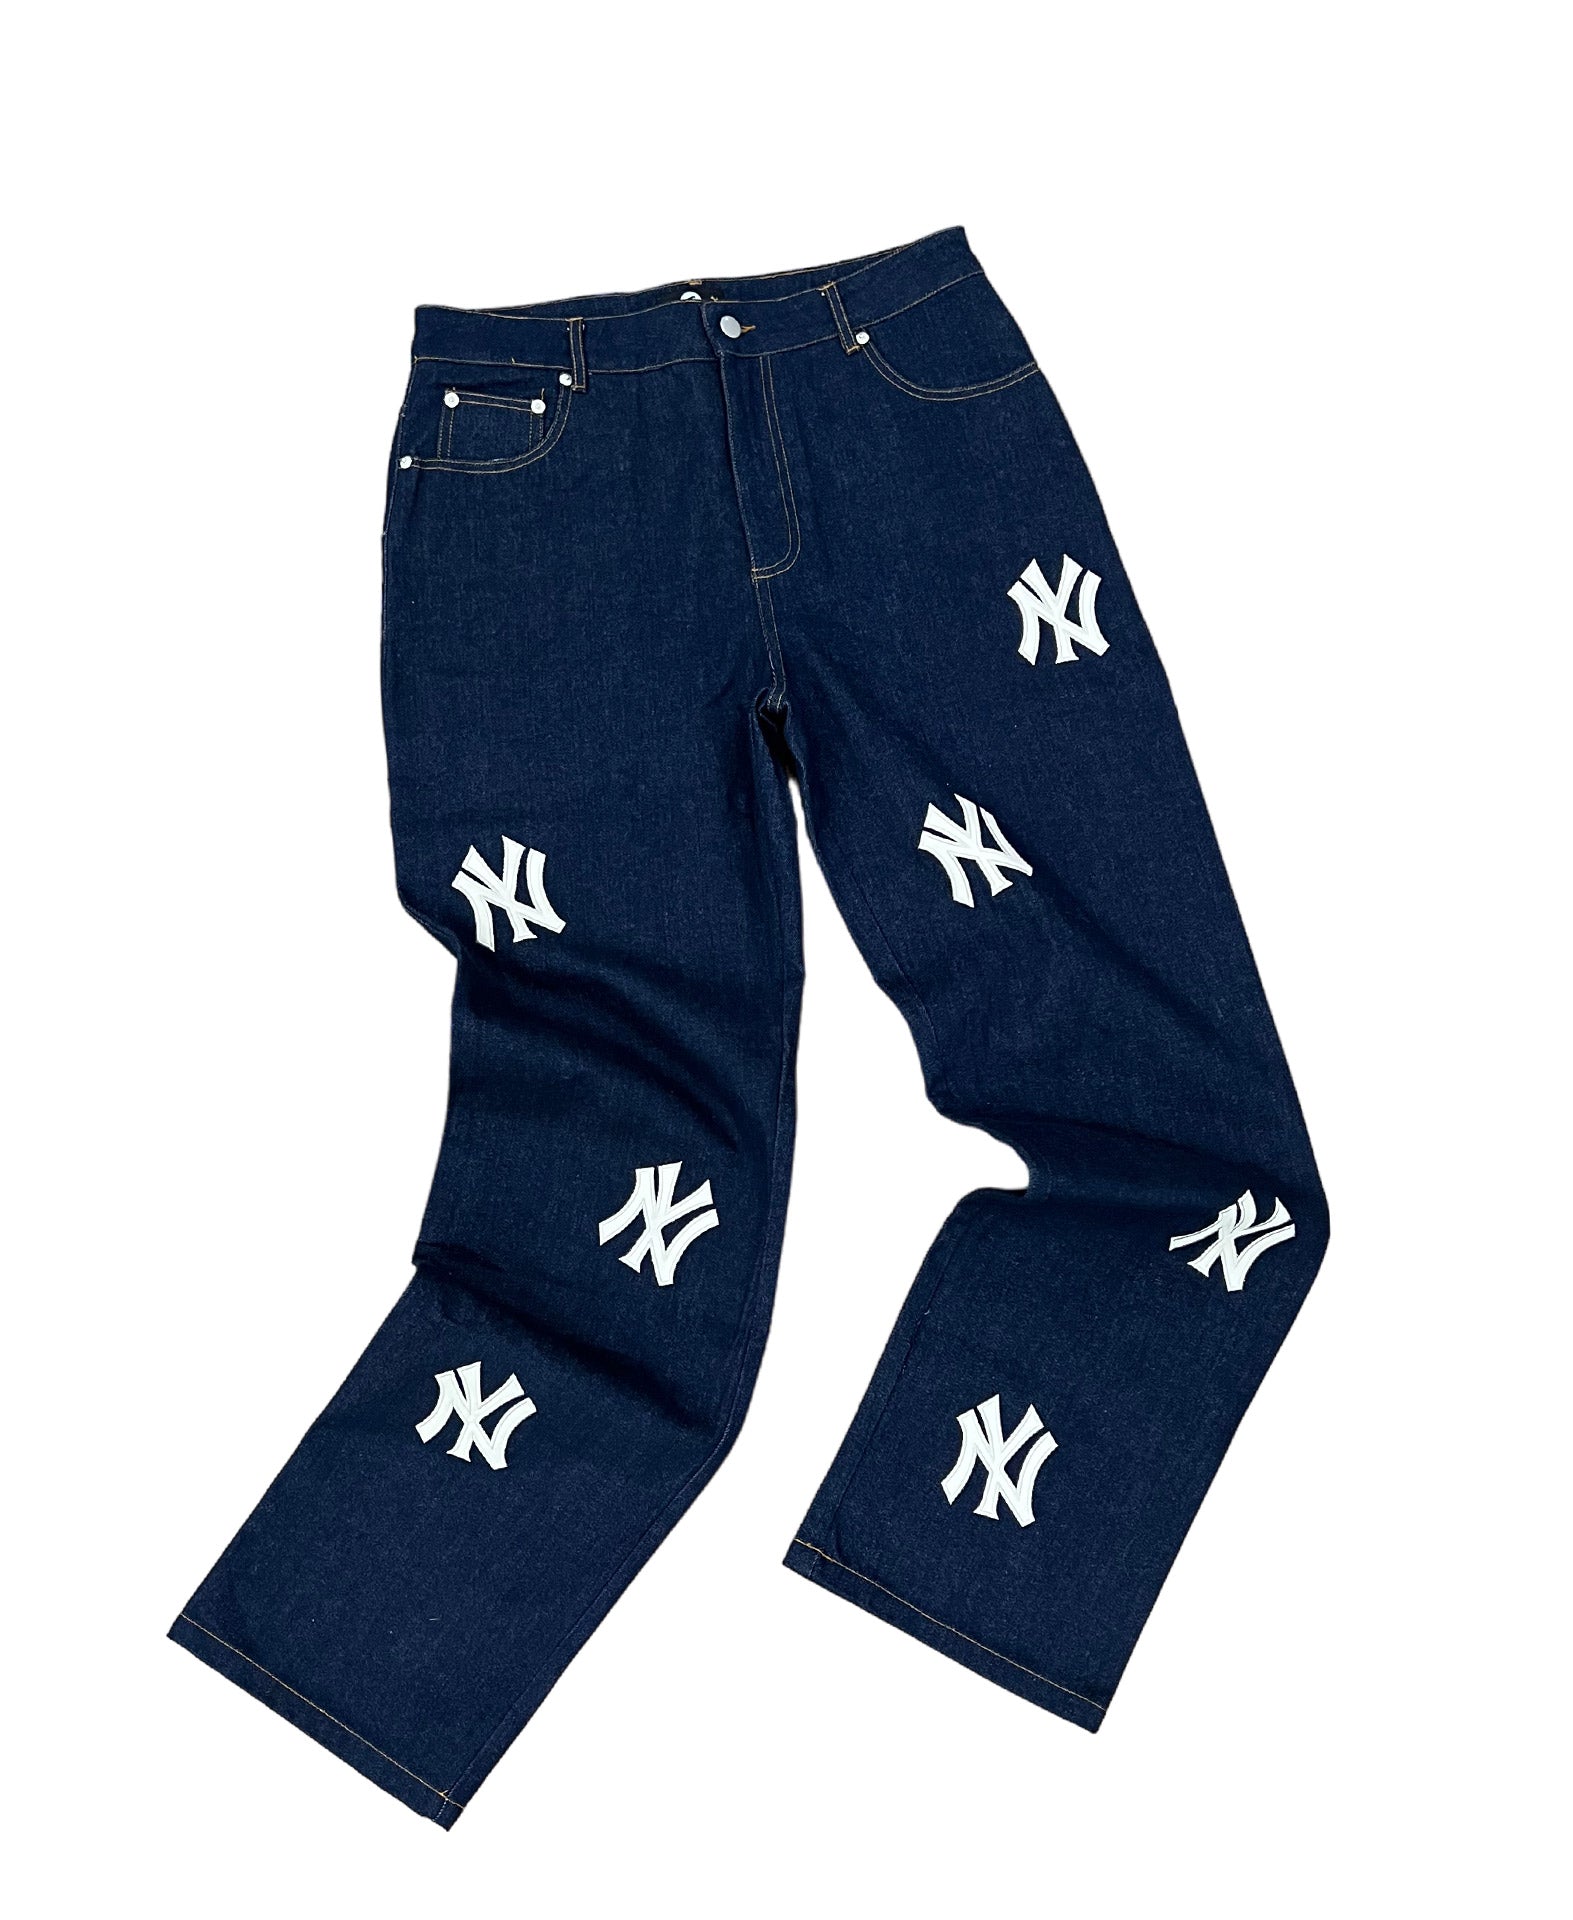 New York Patch Jeans – Navy - ABSTRACTBYJULES